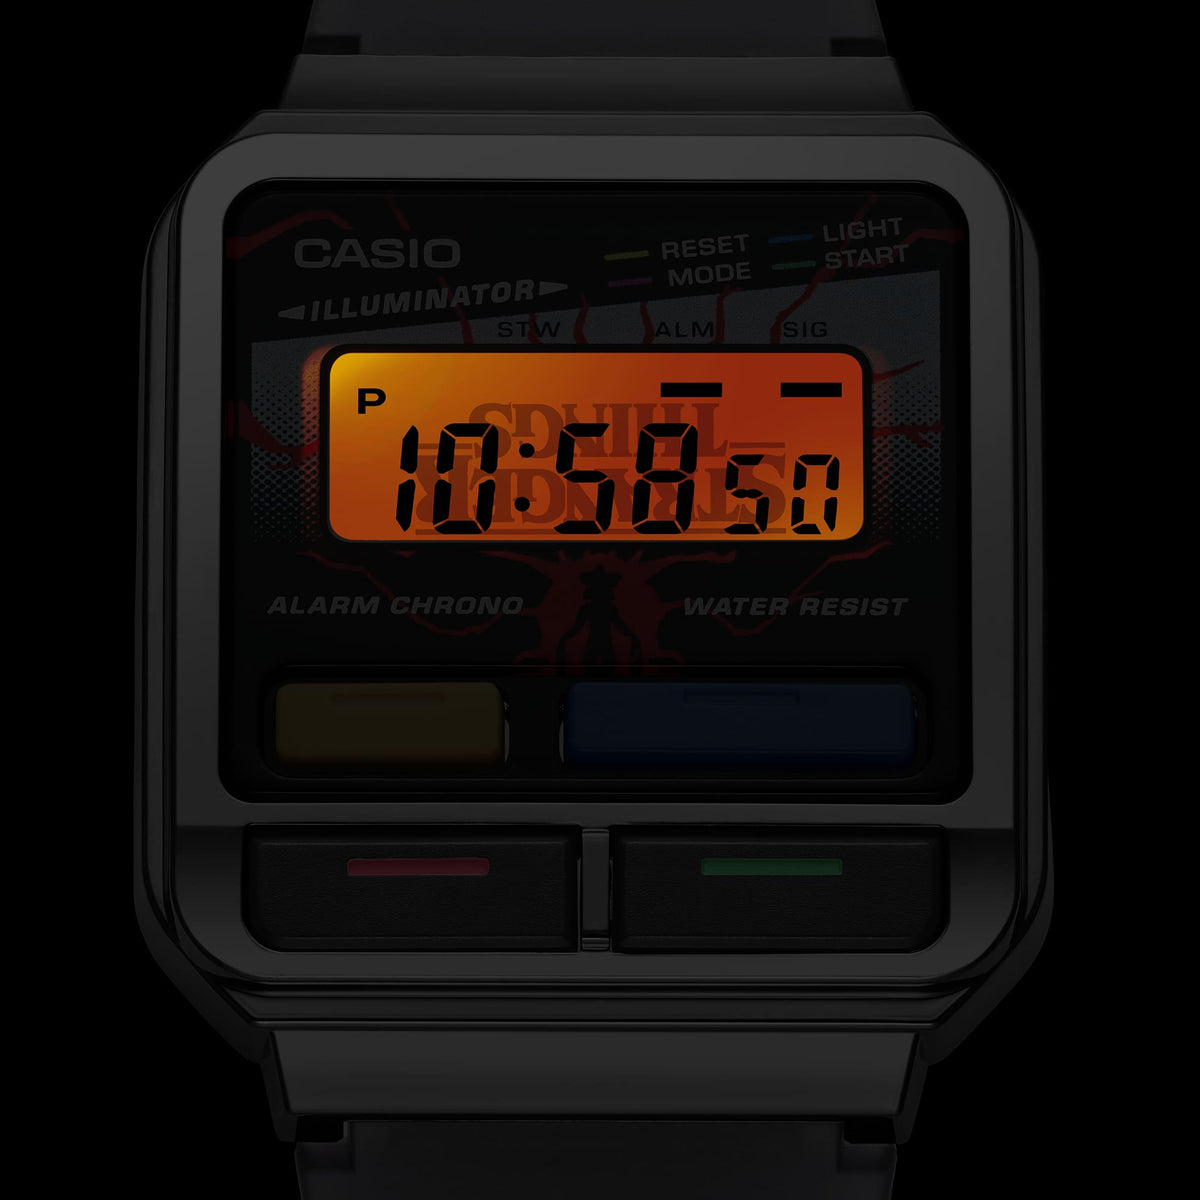 Casio Vintage Digital - A120 Series - Stranger Things Collaboration